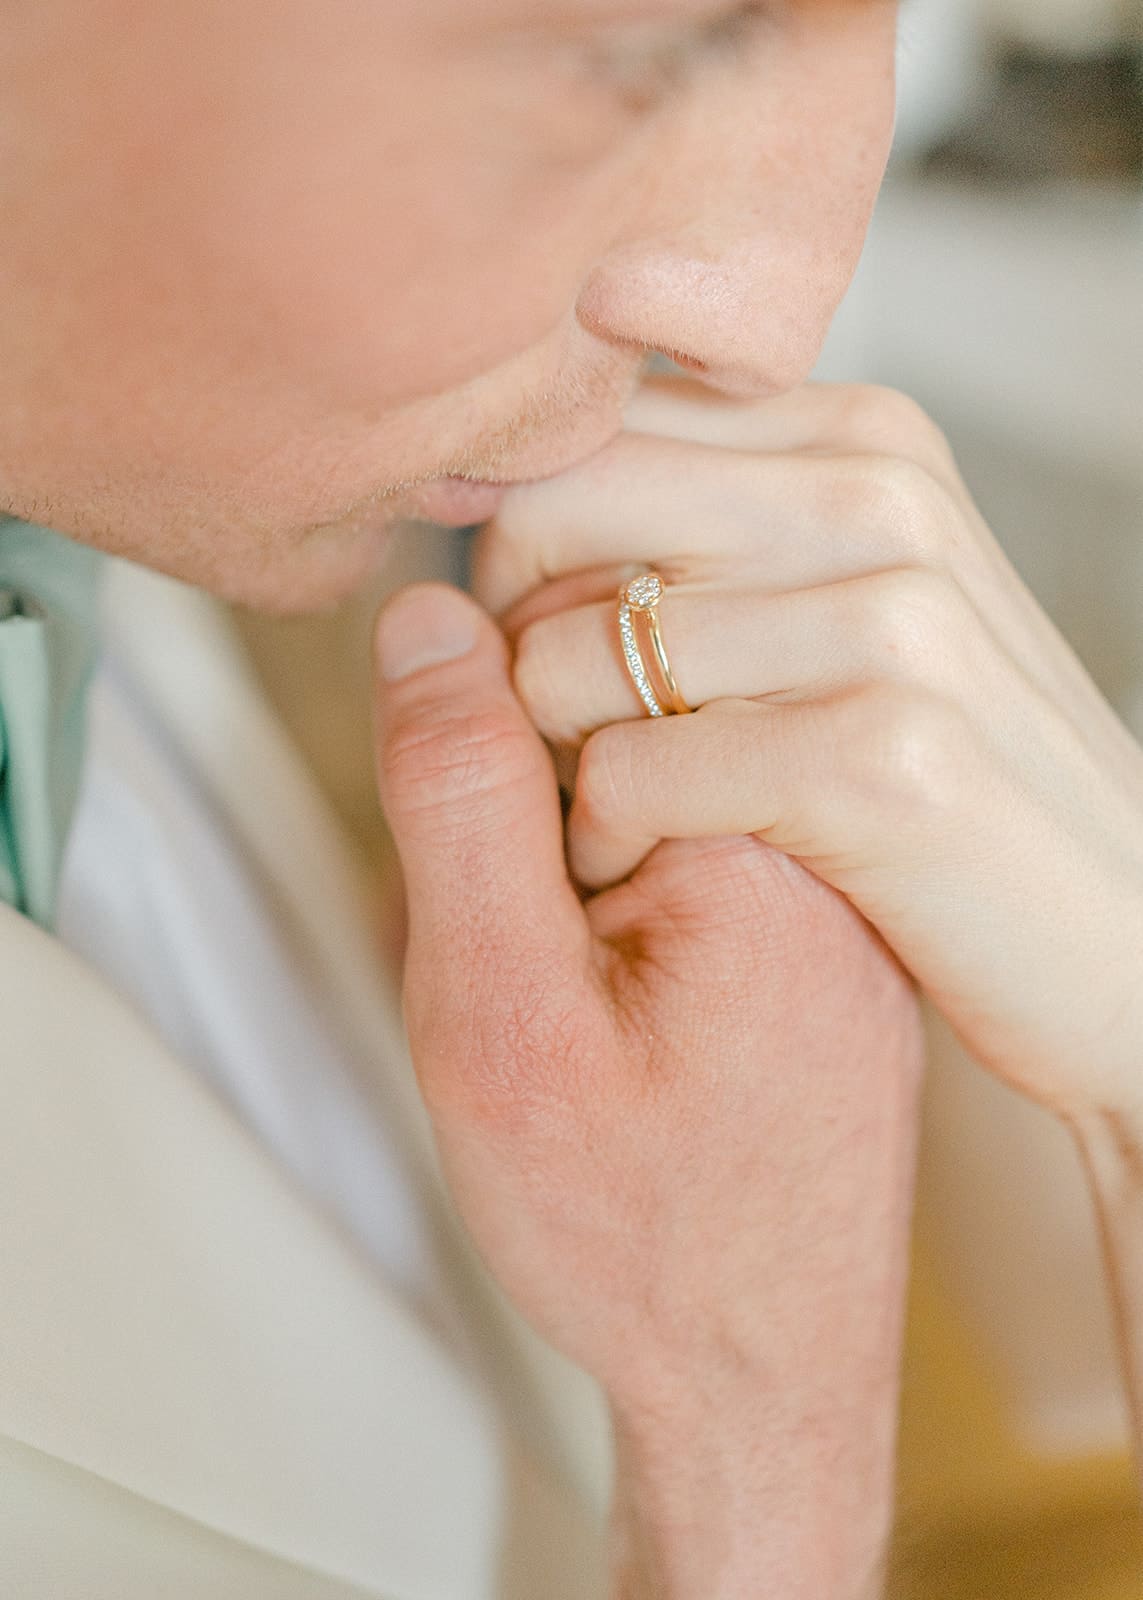 Groom kissing hand of bride focus on wedding ring and engagement ring of bride